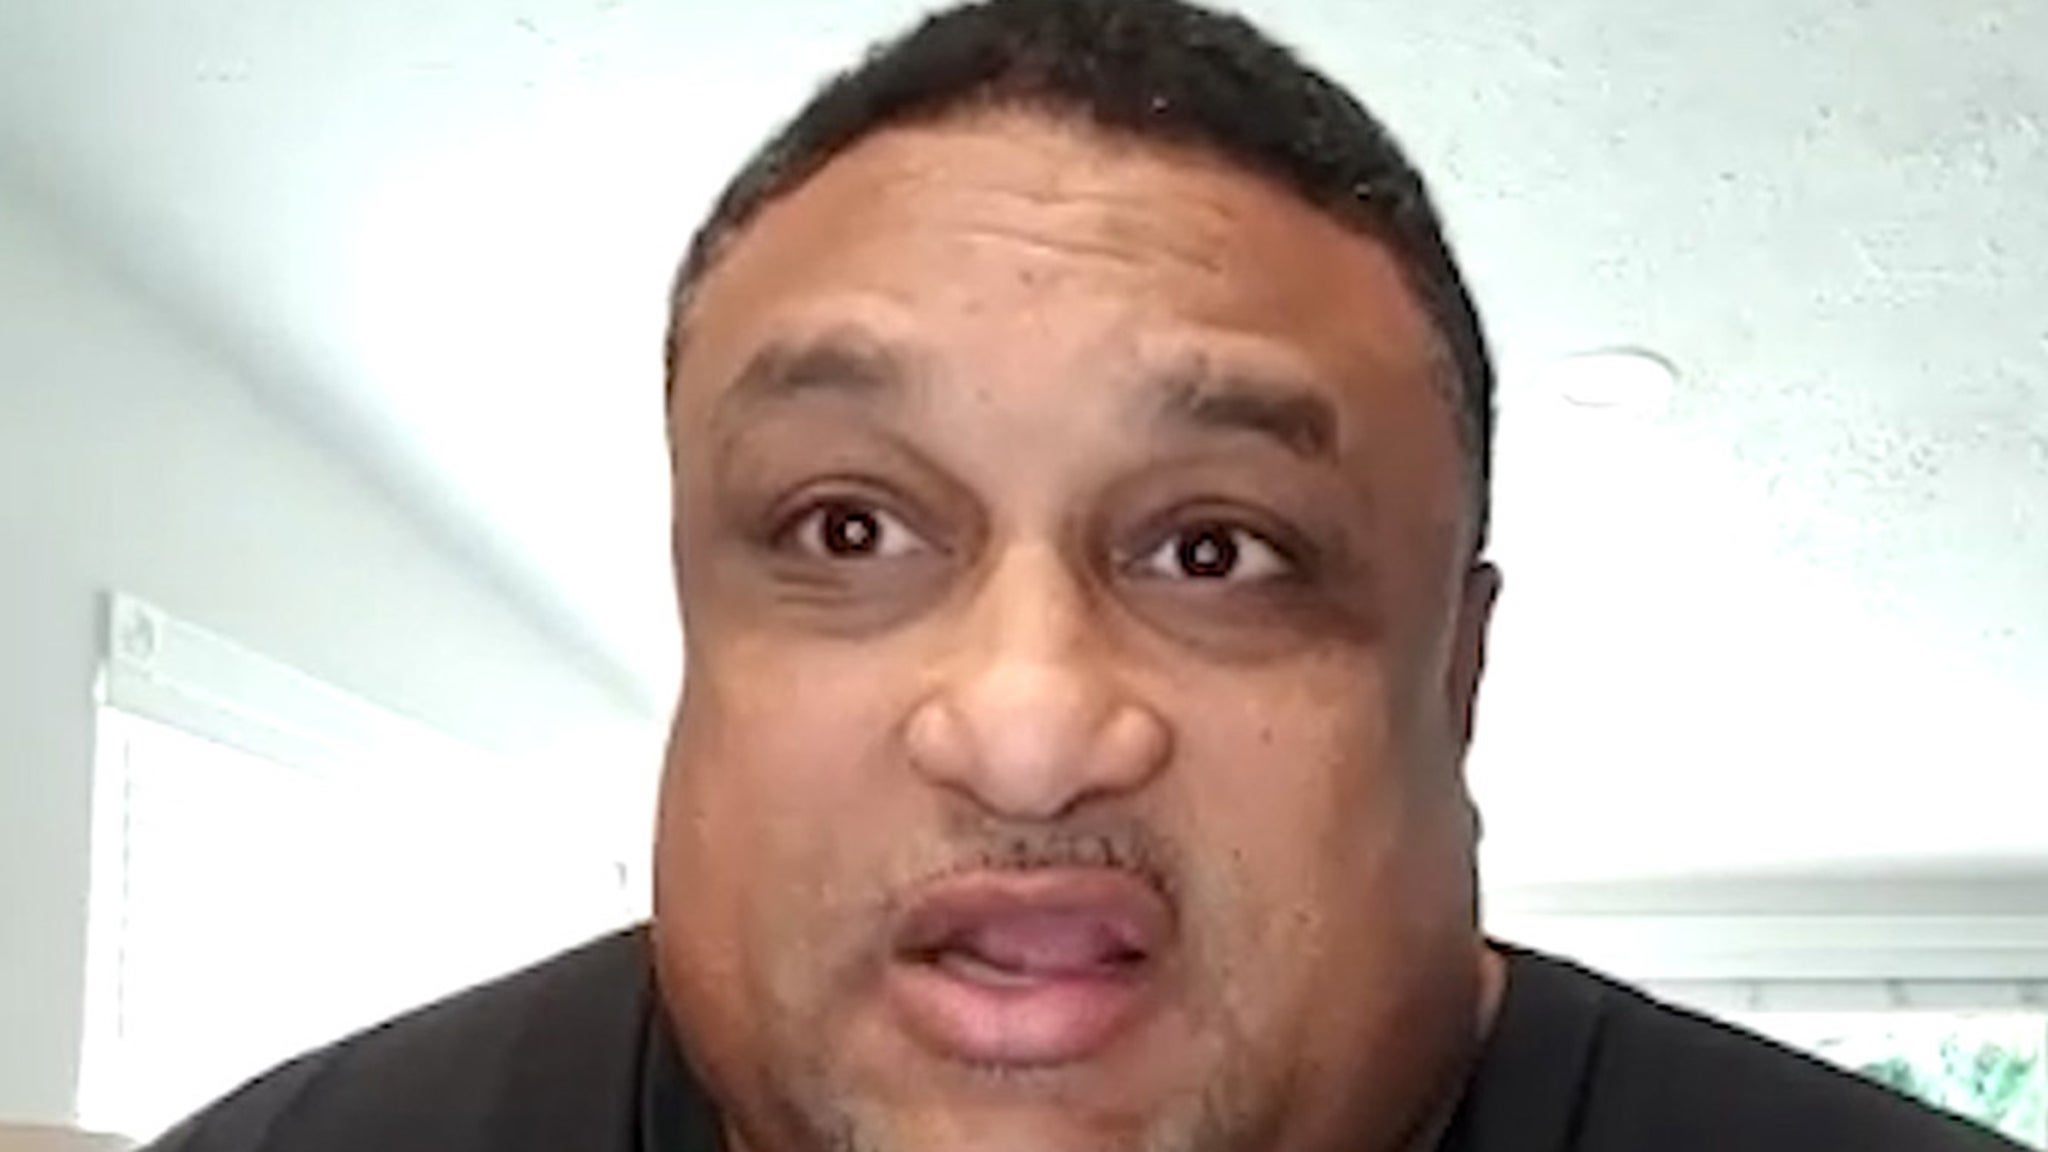 Photo of Willie Roaf Says